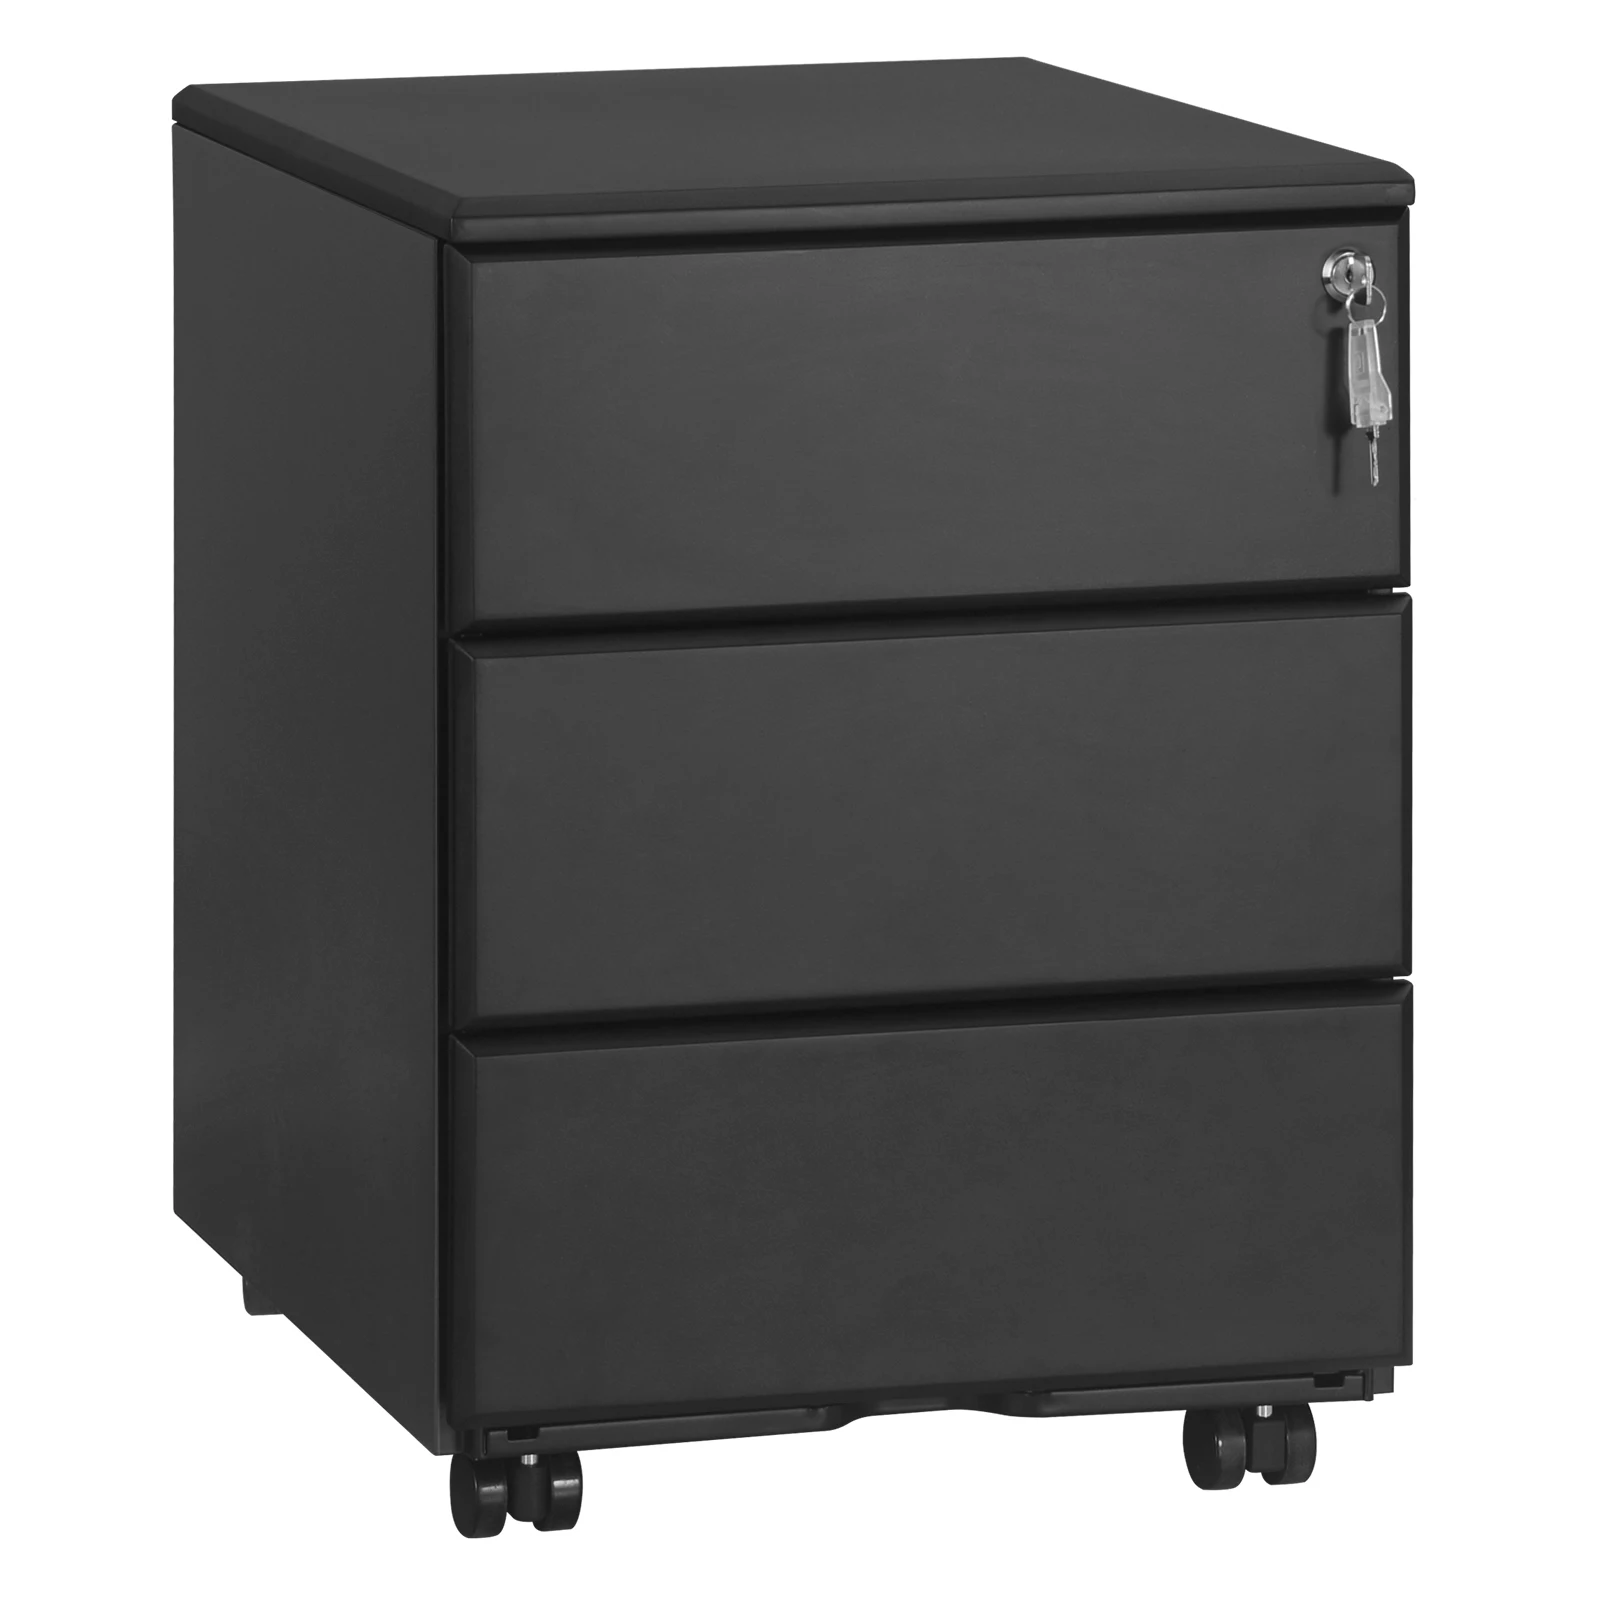 Mobile Filing Cabinet Office Cabinet With Drawers Office Container Lockable Adjustable Hanging File Cabinet